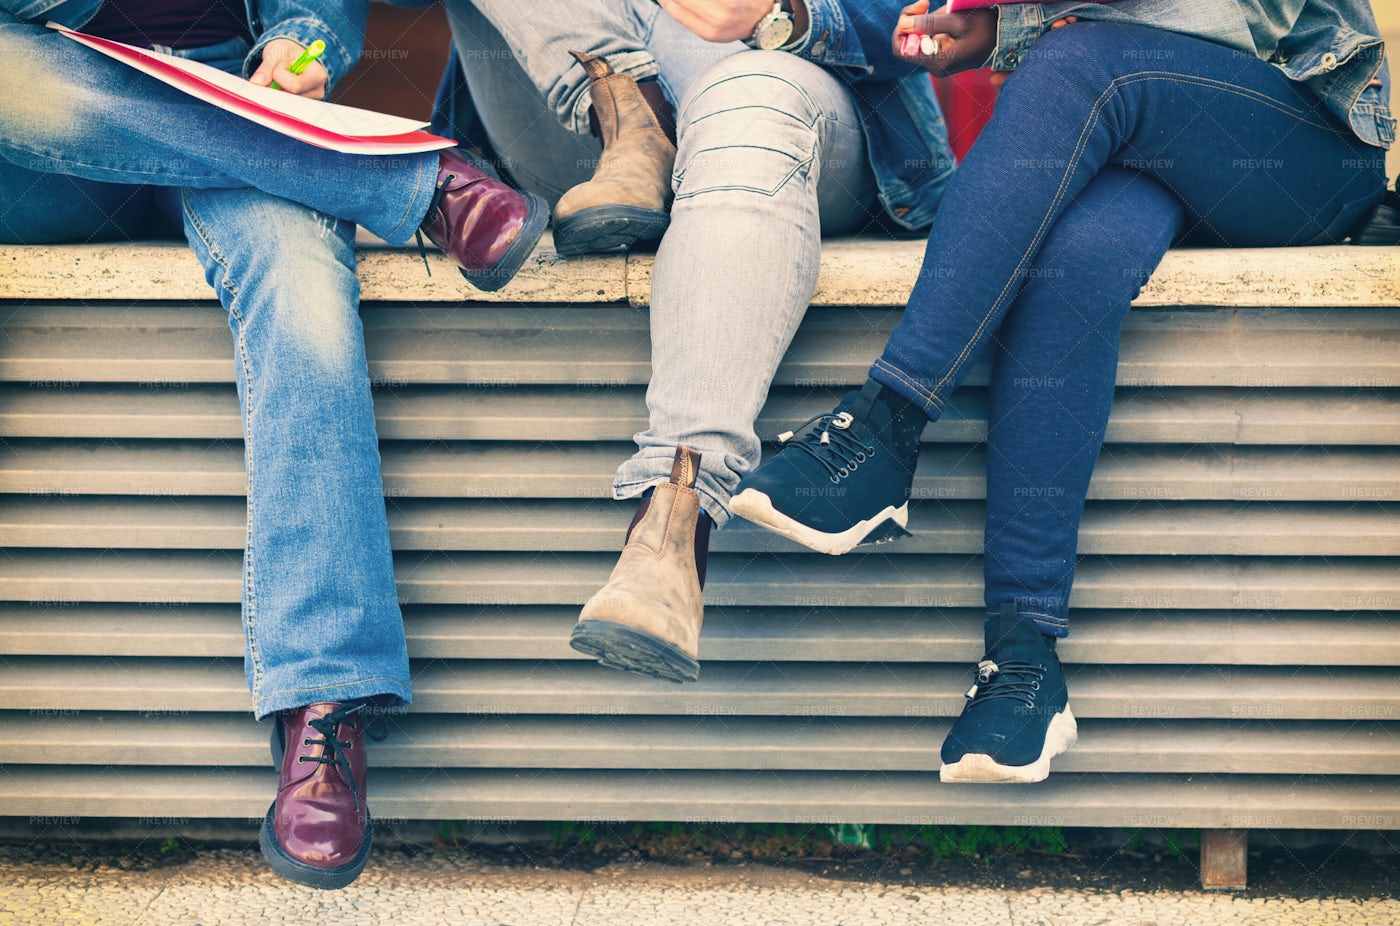 Legs Of People Sitting On A Bench.: Stock Photos